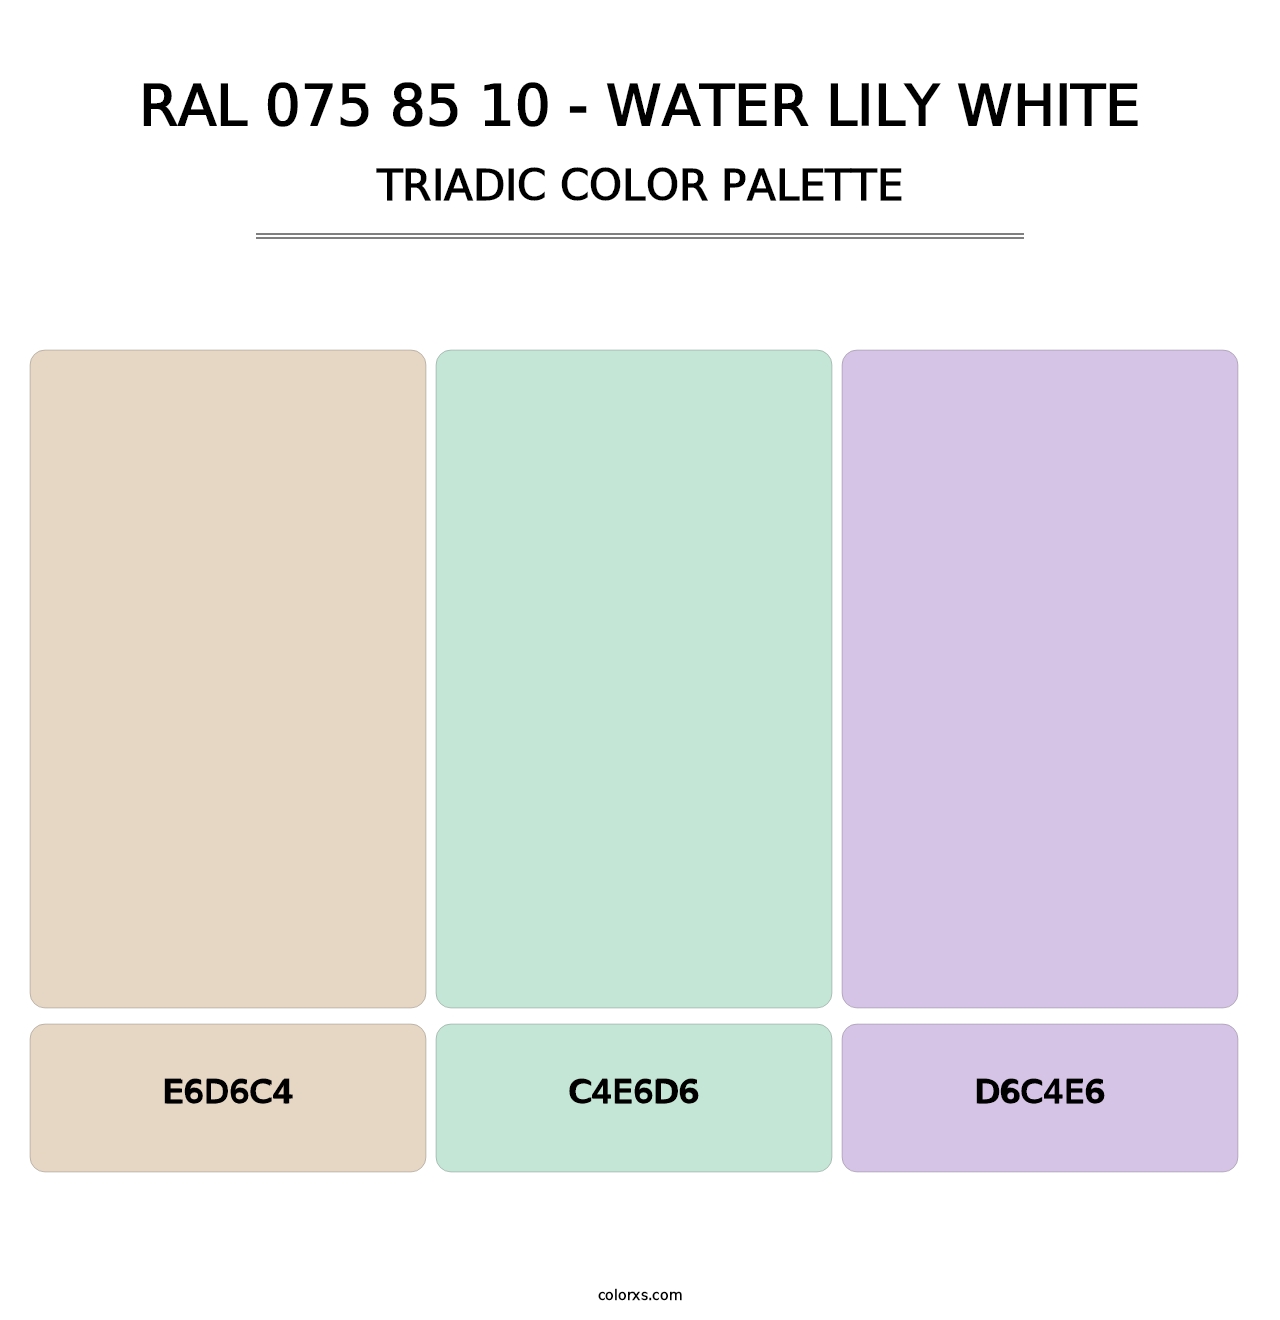 RAL 075 85 10 - Water Lily White - Triadic Color Palette